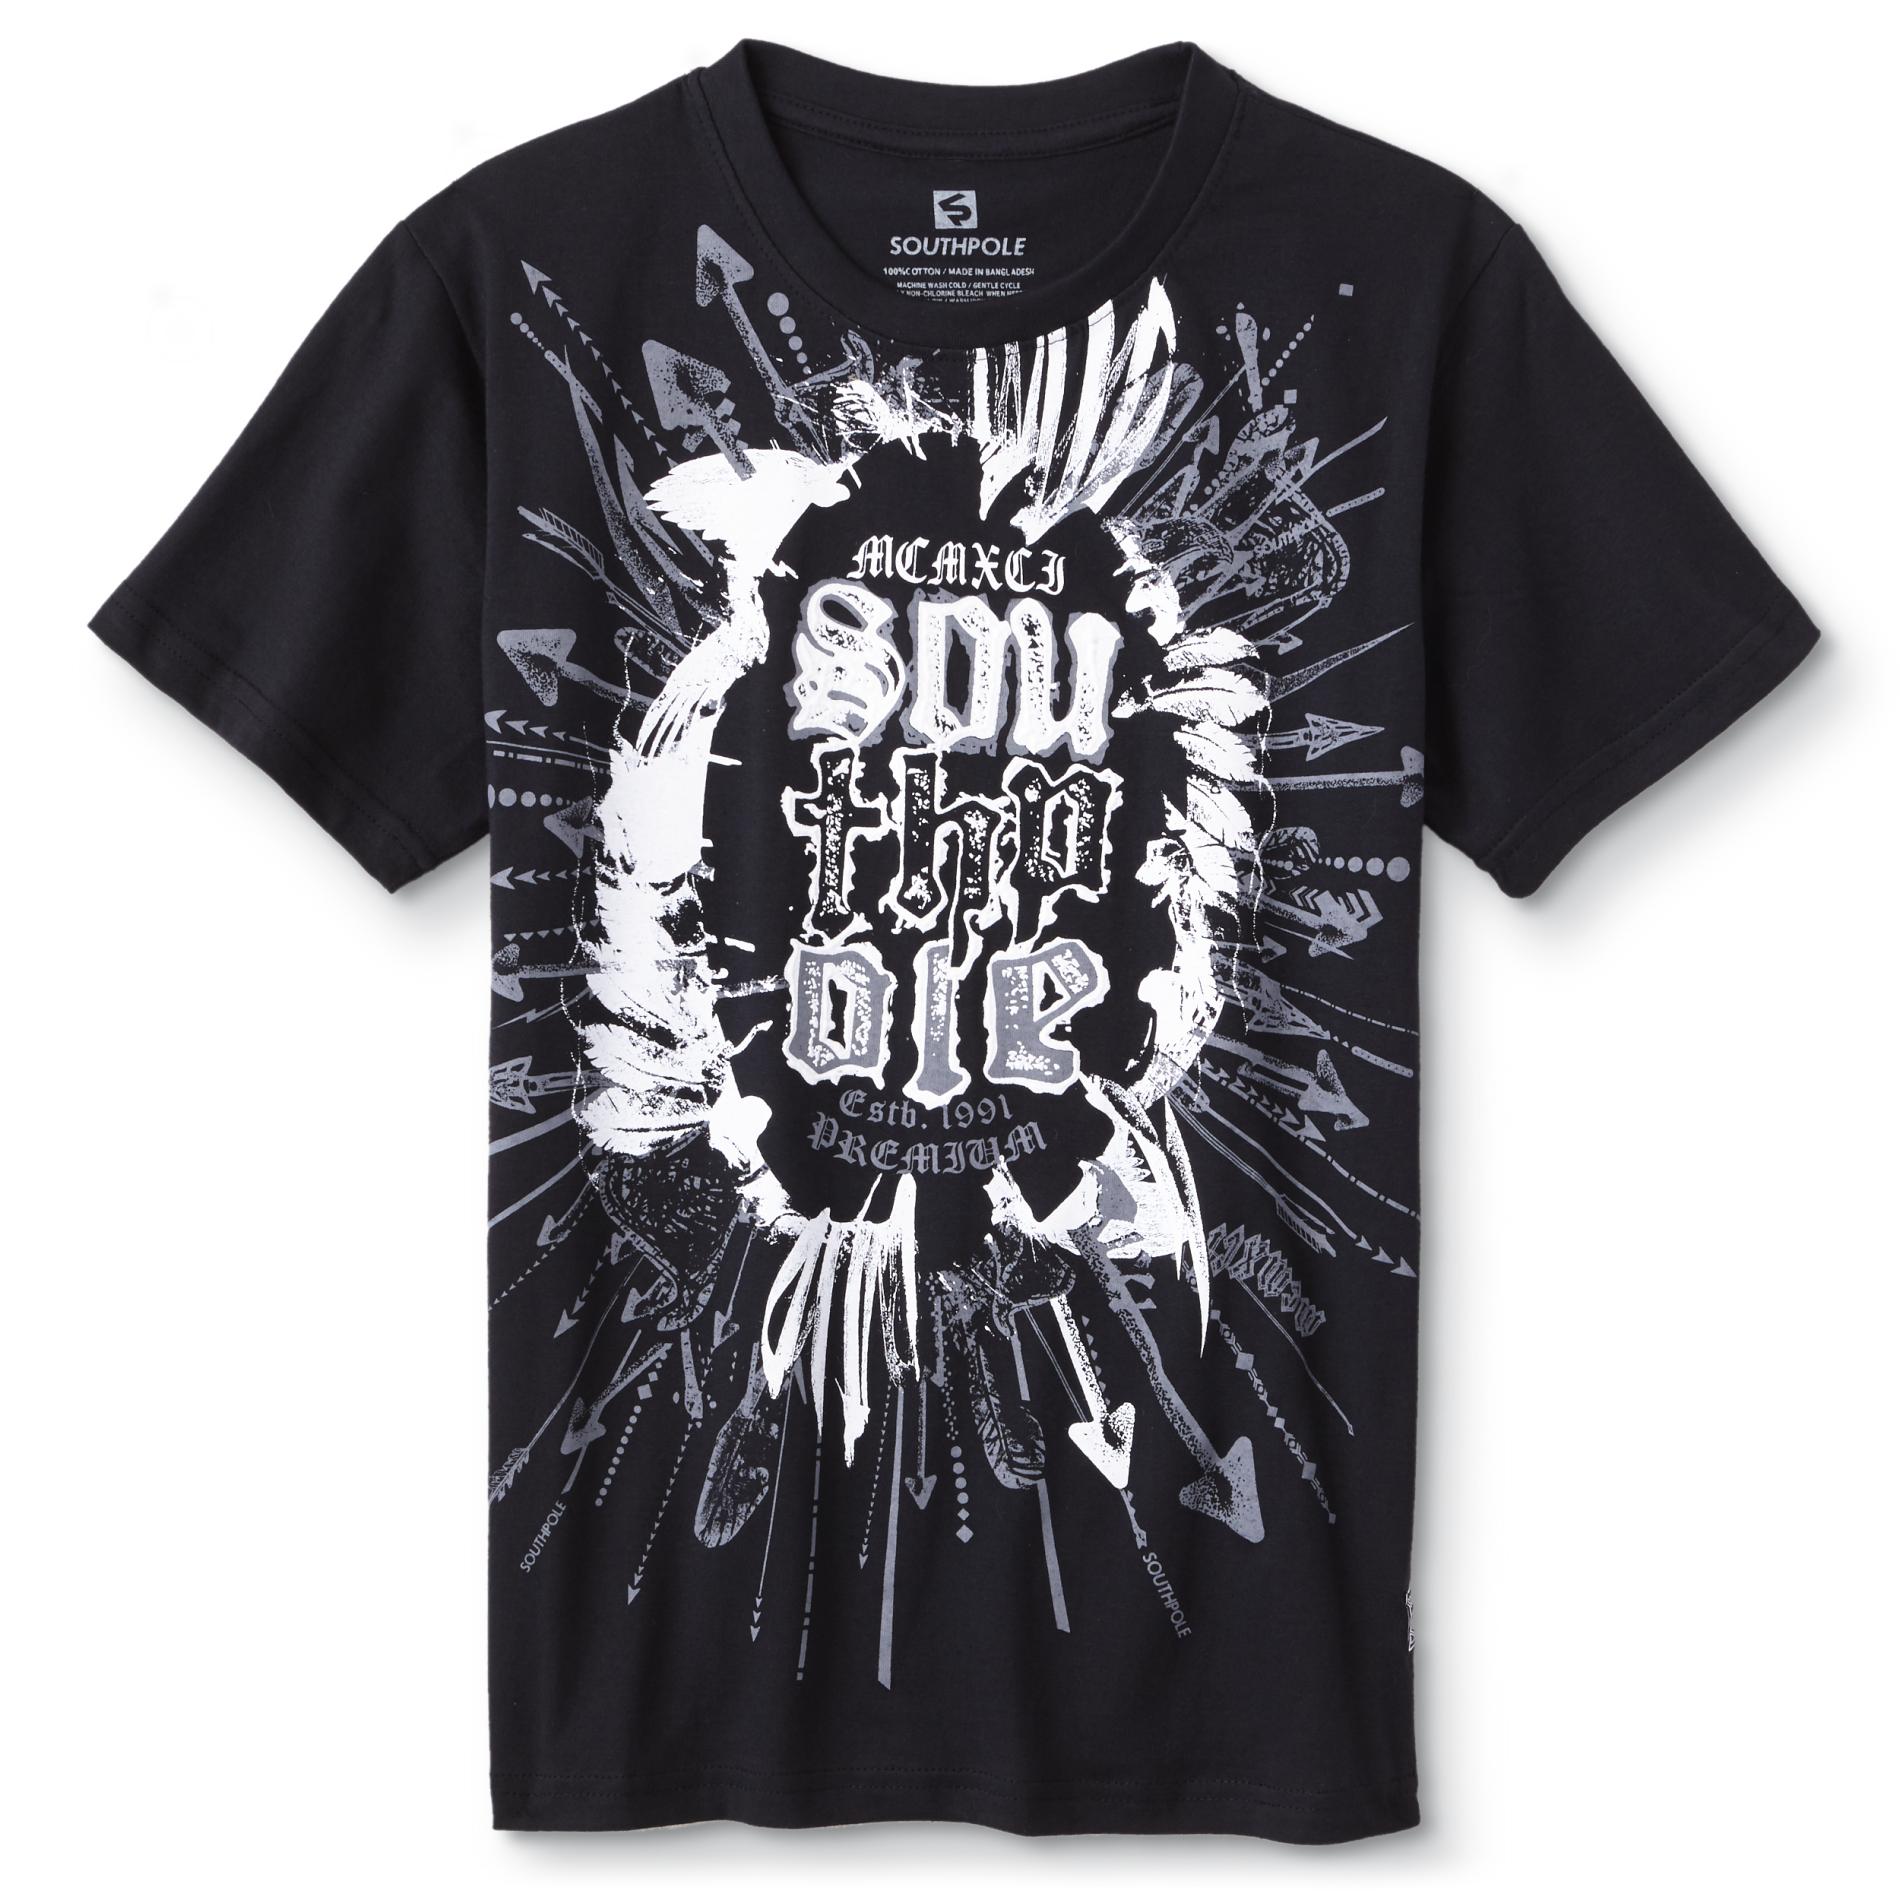 Southpole Boys' Graphic T-Shirt - Arrows & Feathers